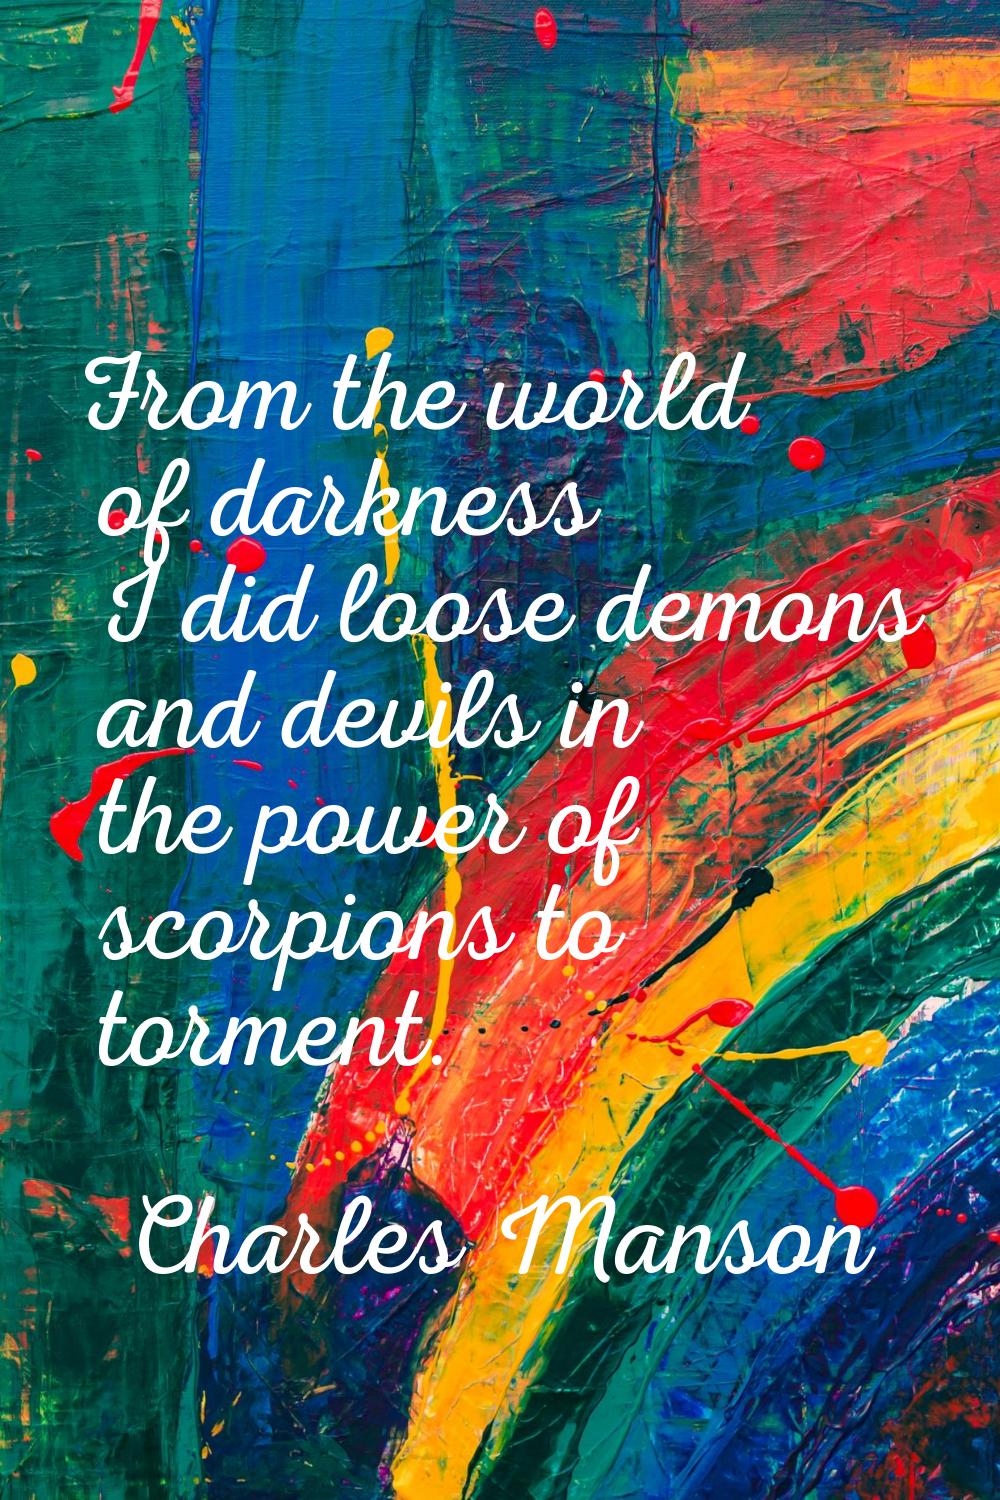 From the world of darkness I did loose demons and devils in the power of scorpions to torment.